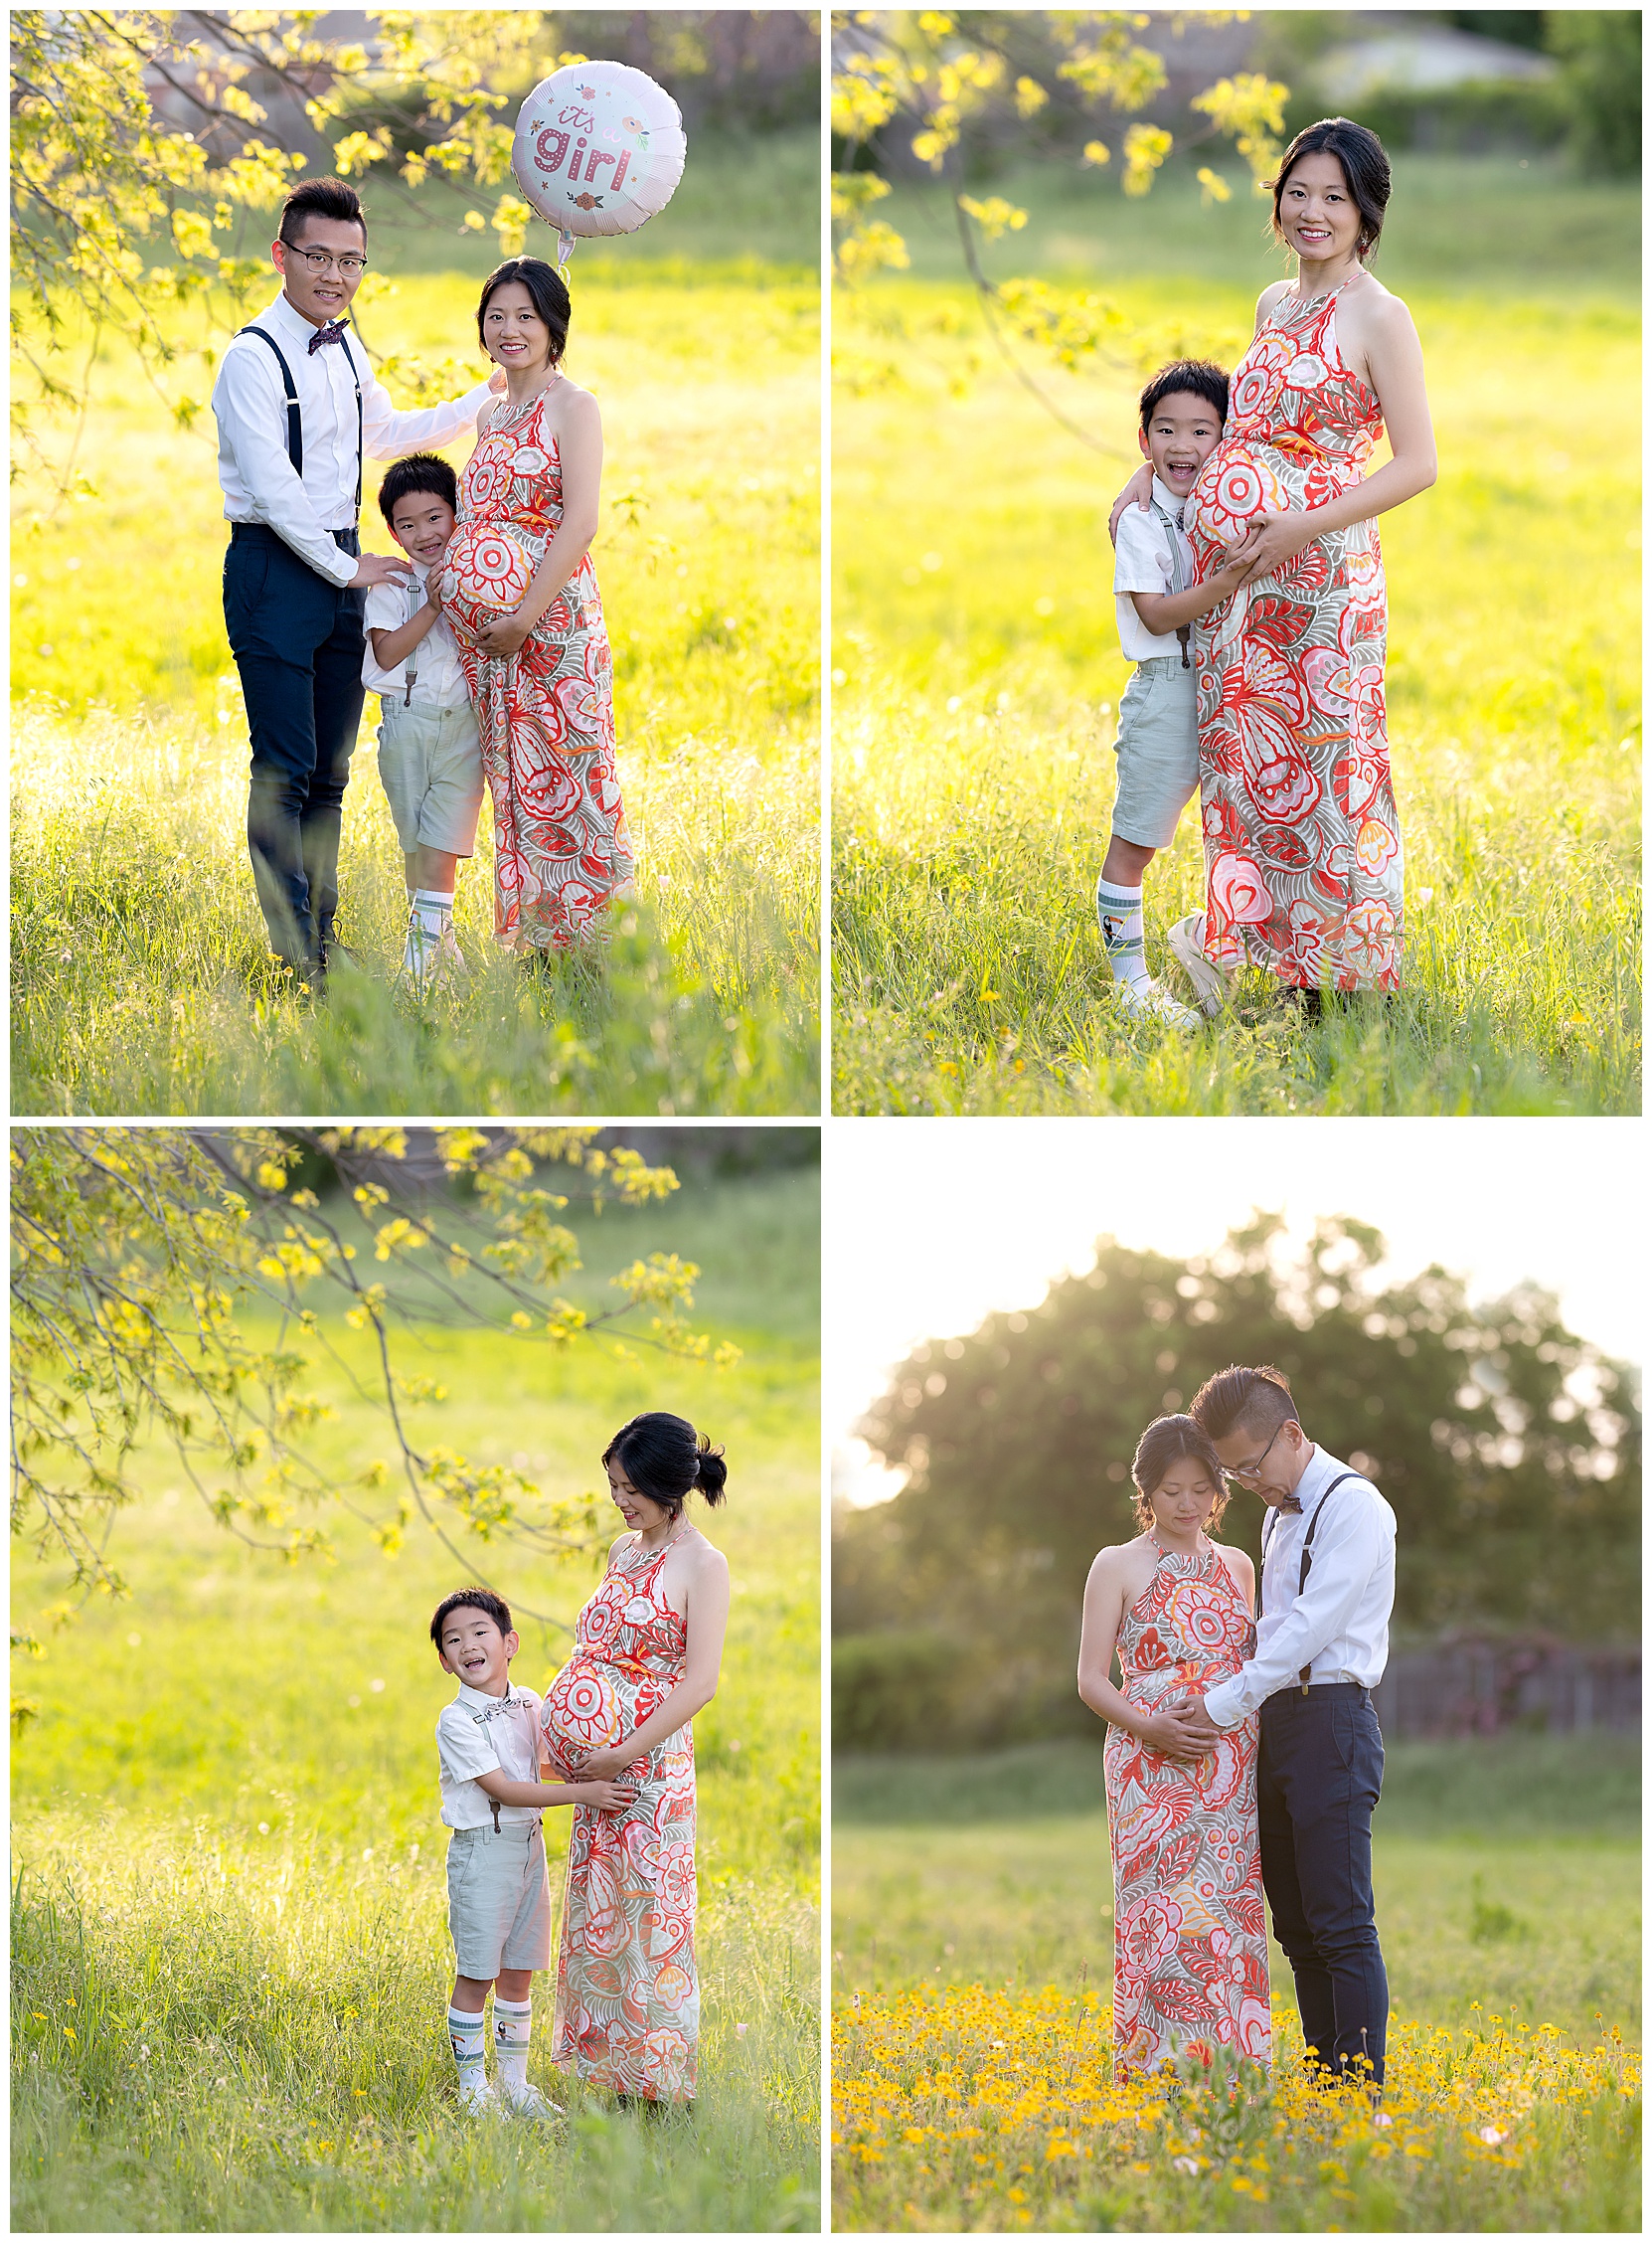 Photo montage featuring a man, woman, and their young son standing in a sunny field